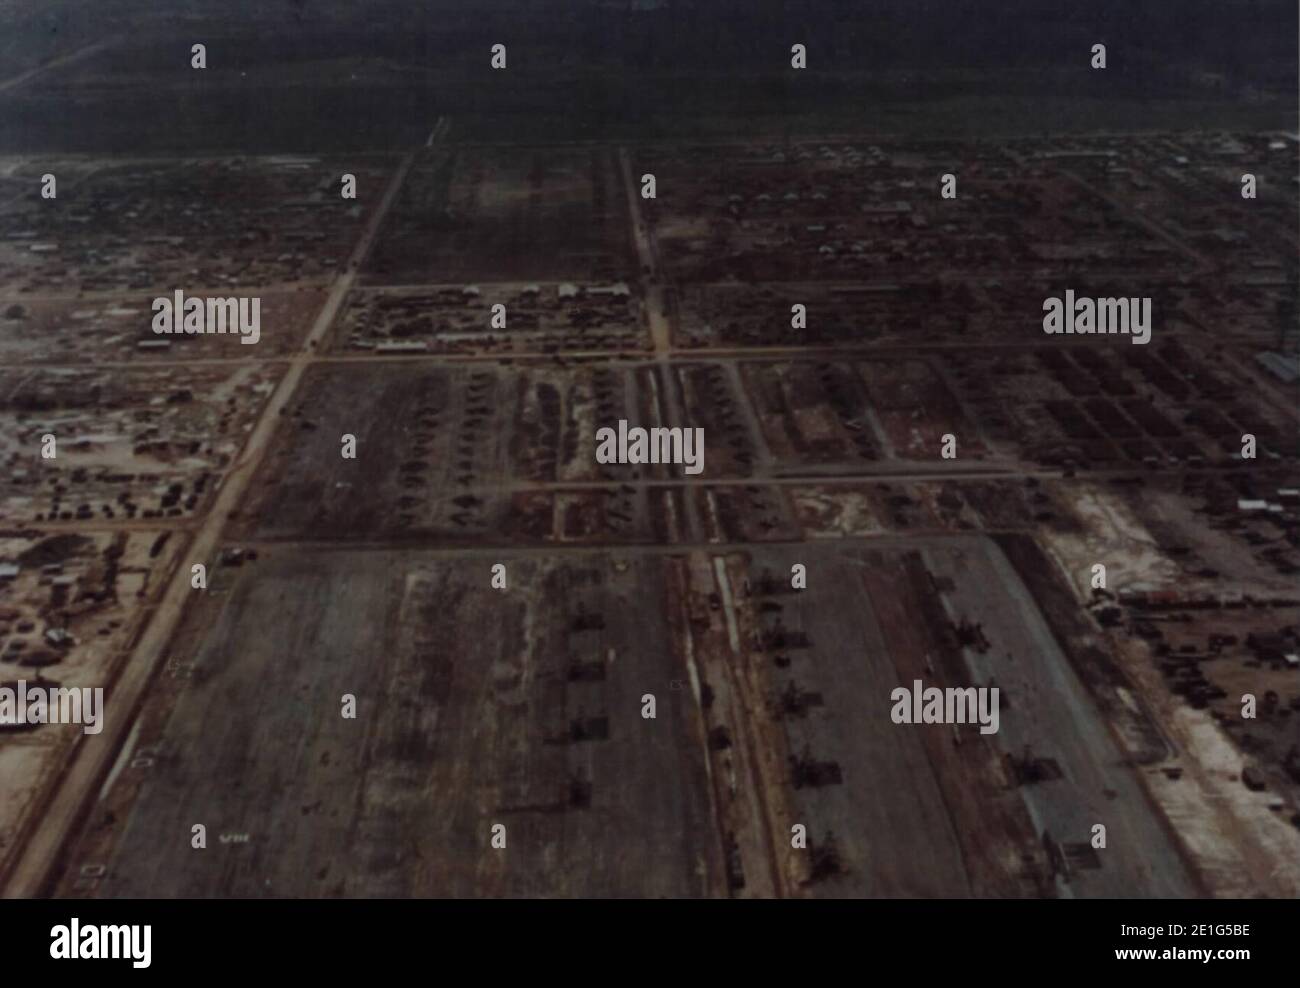 Long Thanh Army Airfield, Juli 1967. Stockfoto